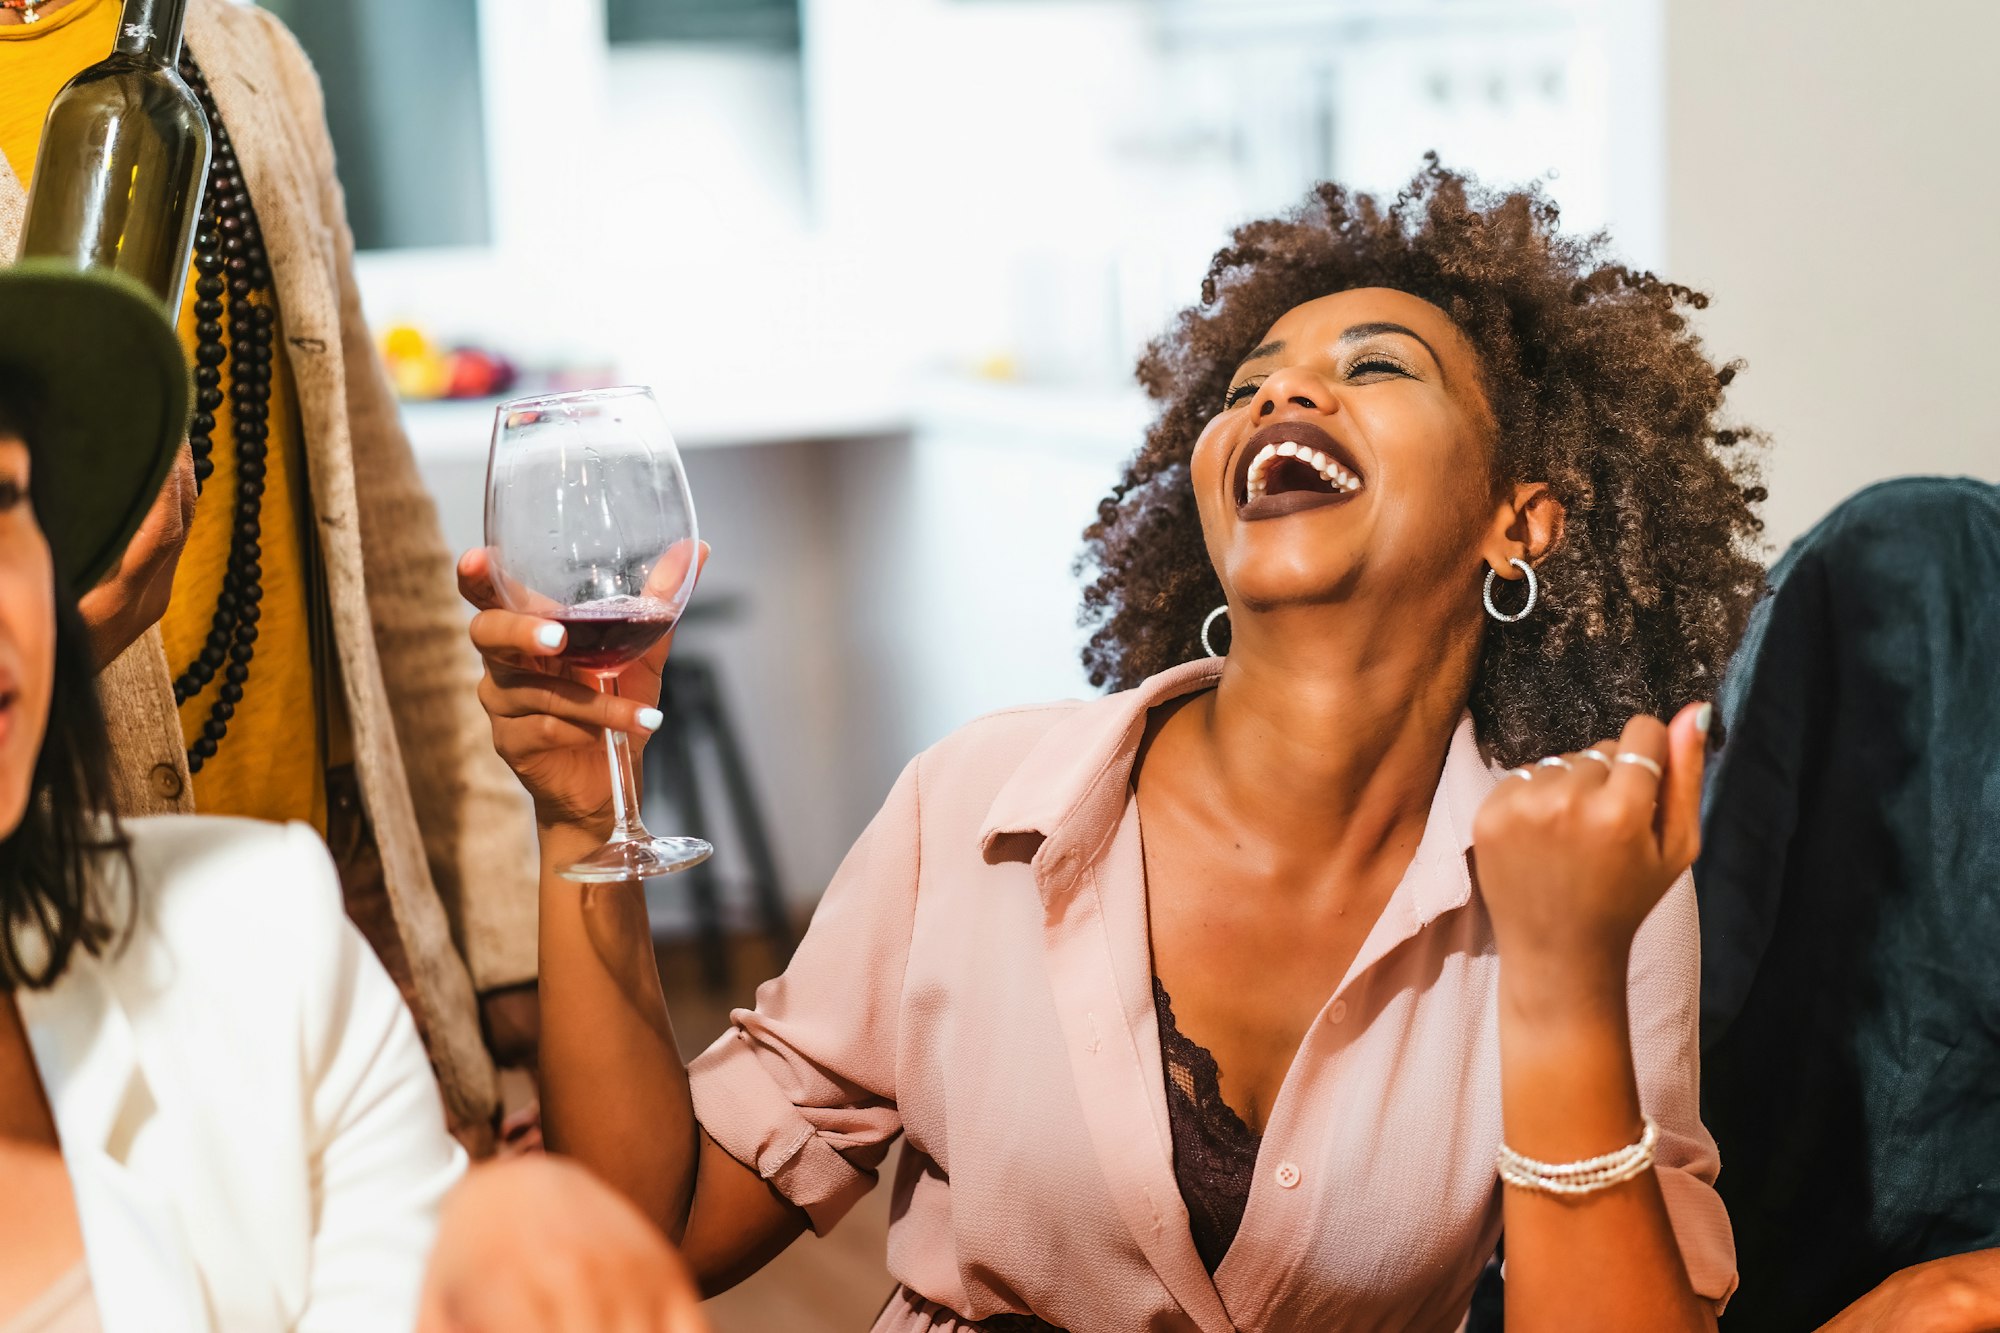 Portrait of an African American woman laughing drinking wine